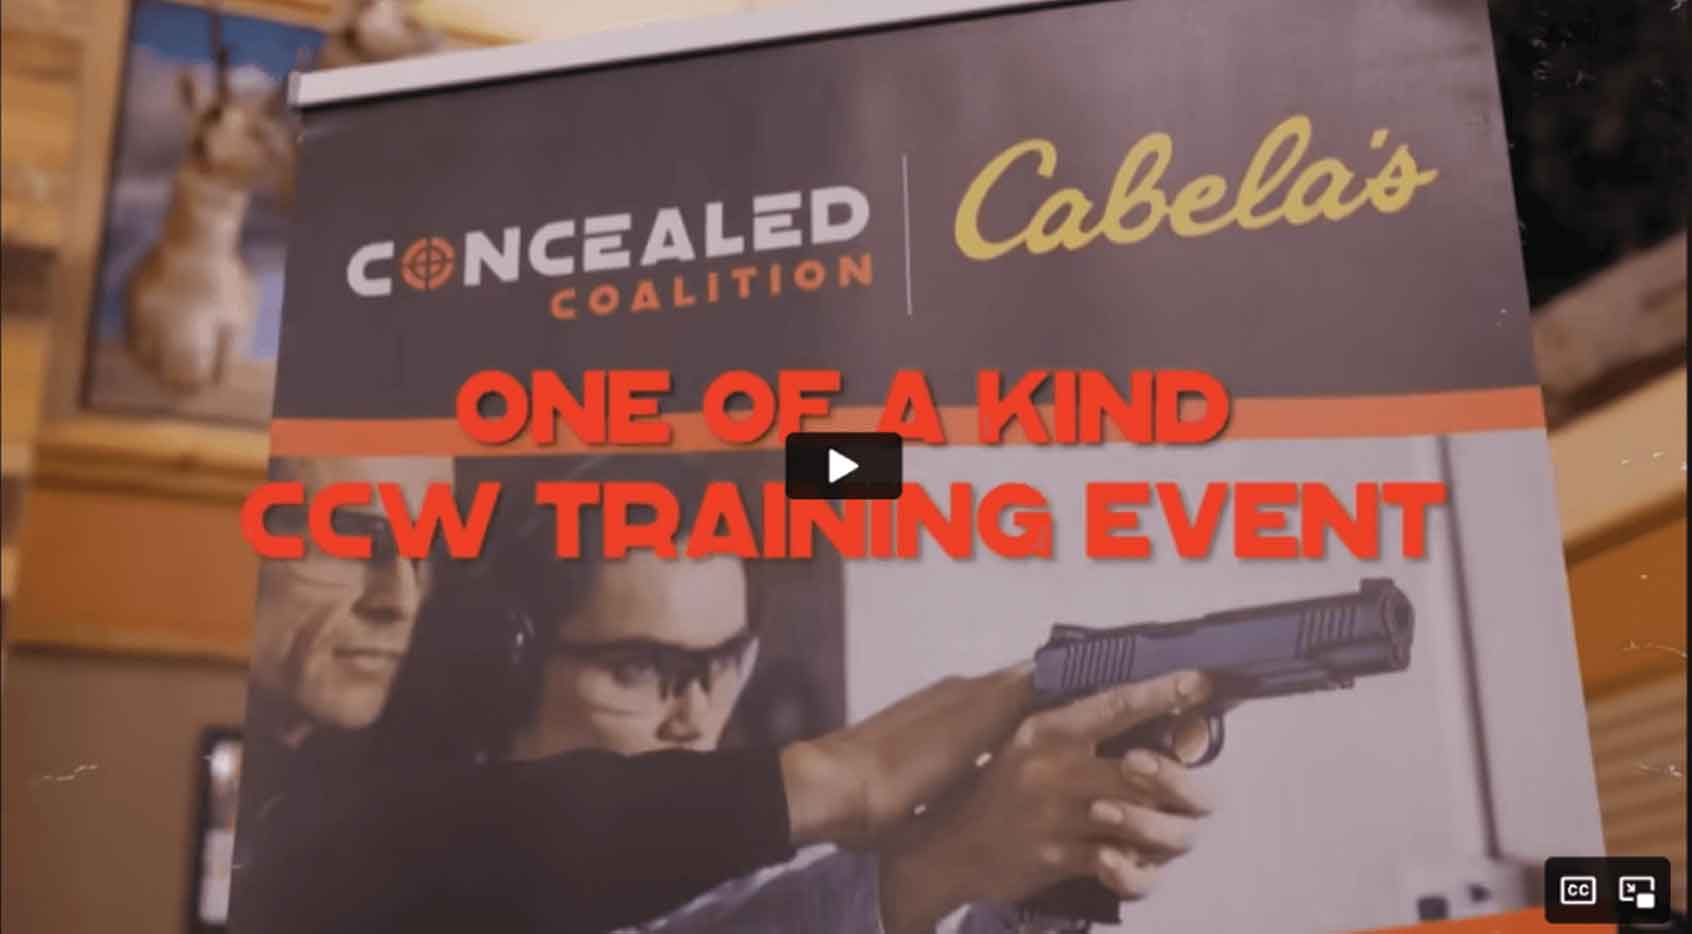 Concealed Coalition welcome video